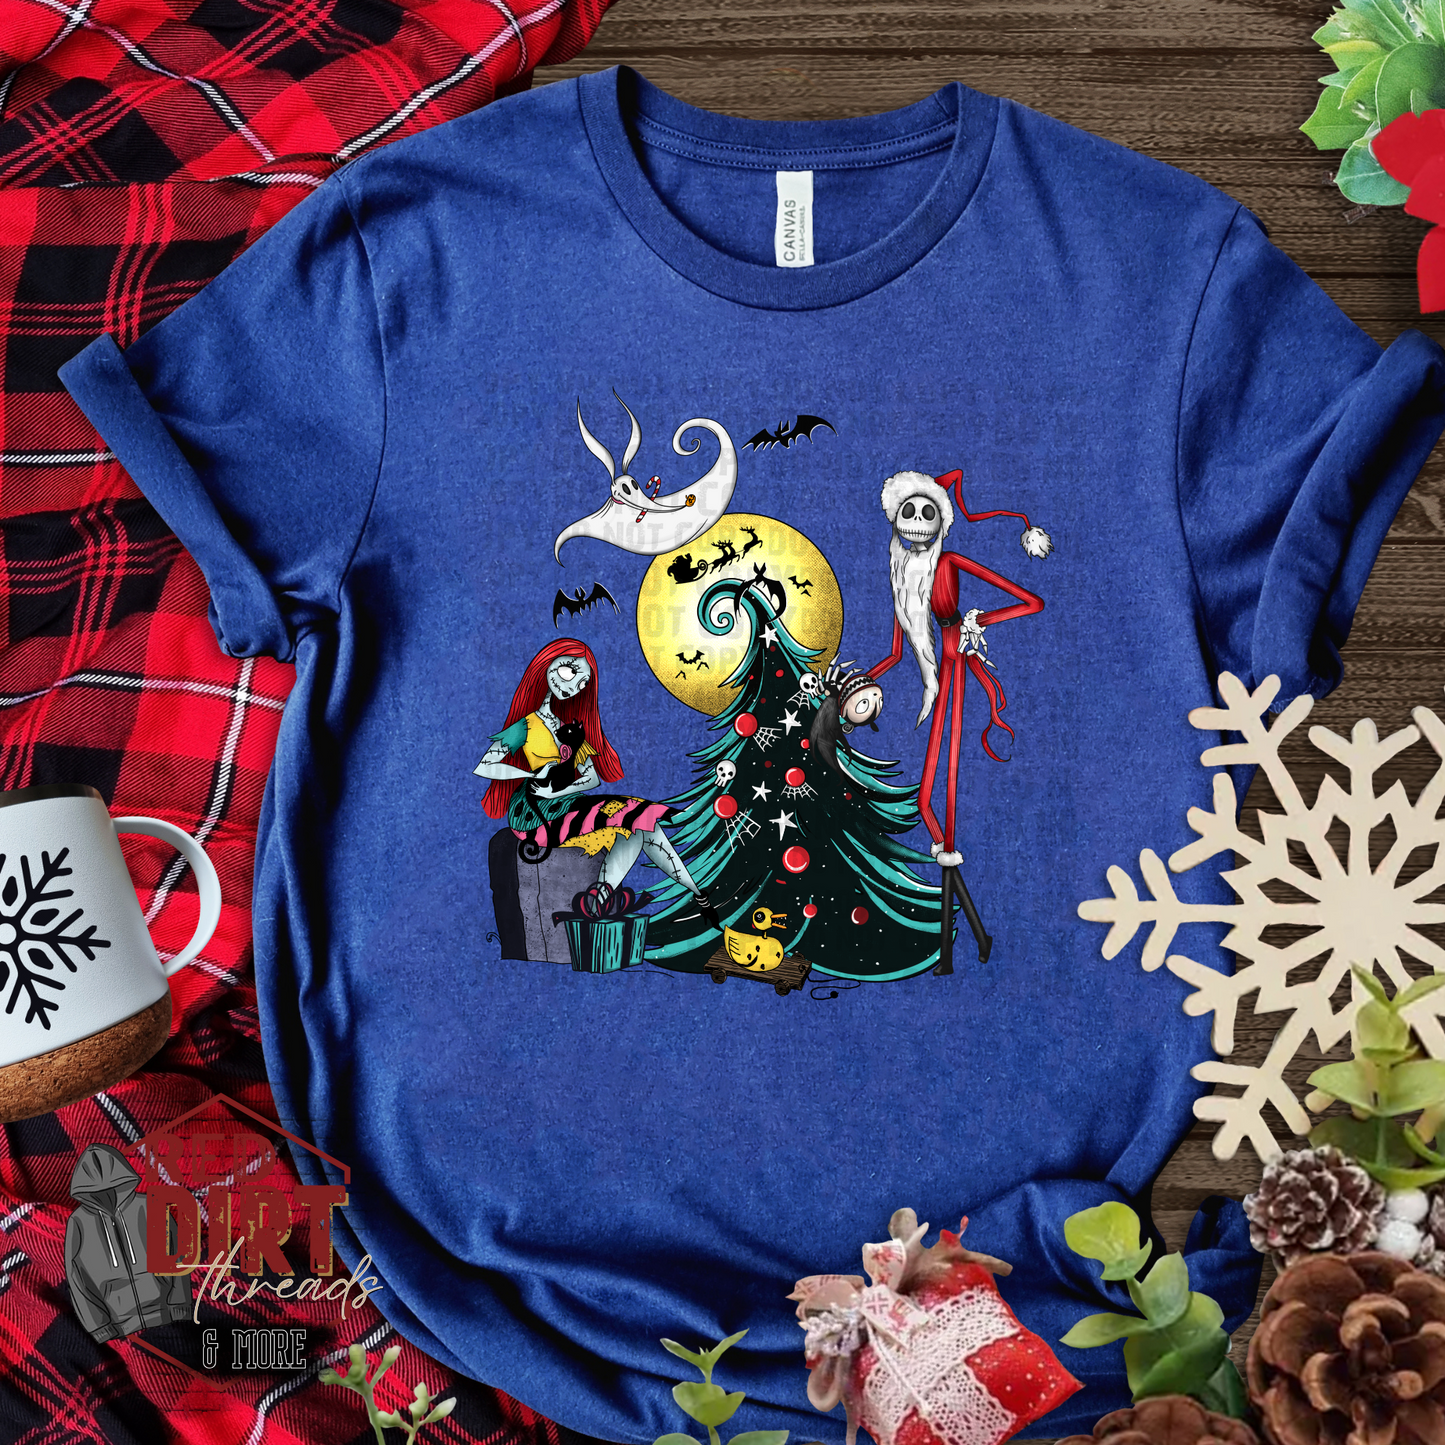 Jack and Sally T-Shirt |Trendy Christmas Movie Shirt | Fast Shipping | Super Soft Shirts for Women/Kid's